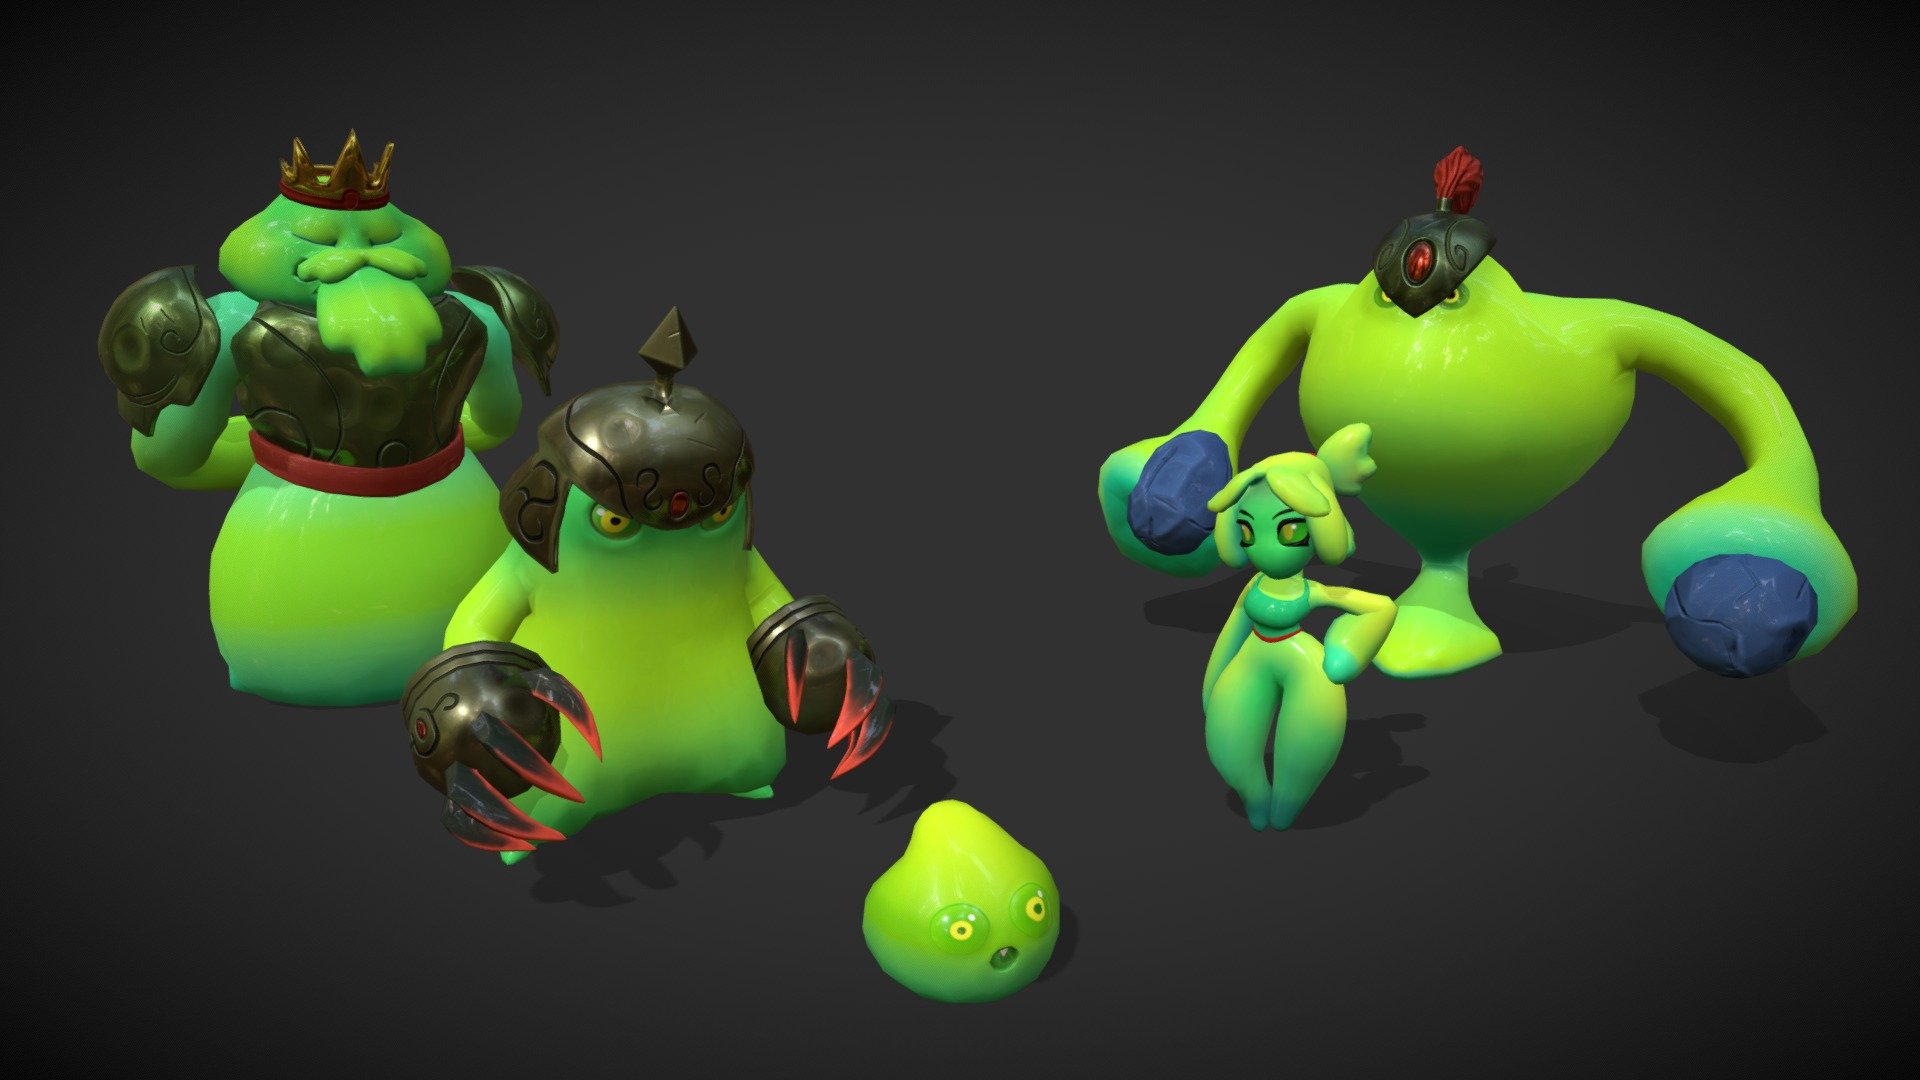 Some stylized modelling and texturing practice that turned into a chance to learn some rigging and animation tools in Blender.

Slime Characters designed by Adam Ryoma Tazi

Zbrush, Substance Painter, Blender - Residents of Slime Kingdom - 3D model by Justin T Phillips (@jtp360) 3d model